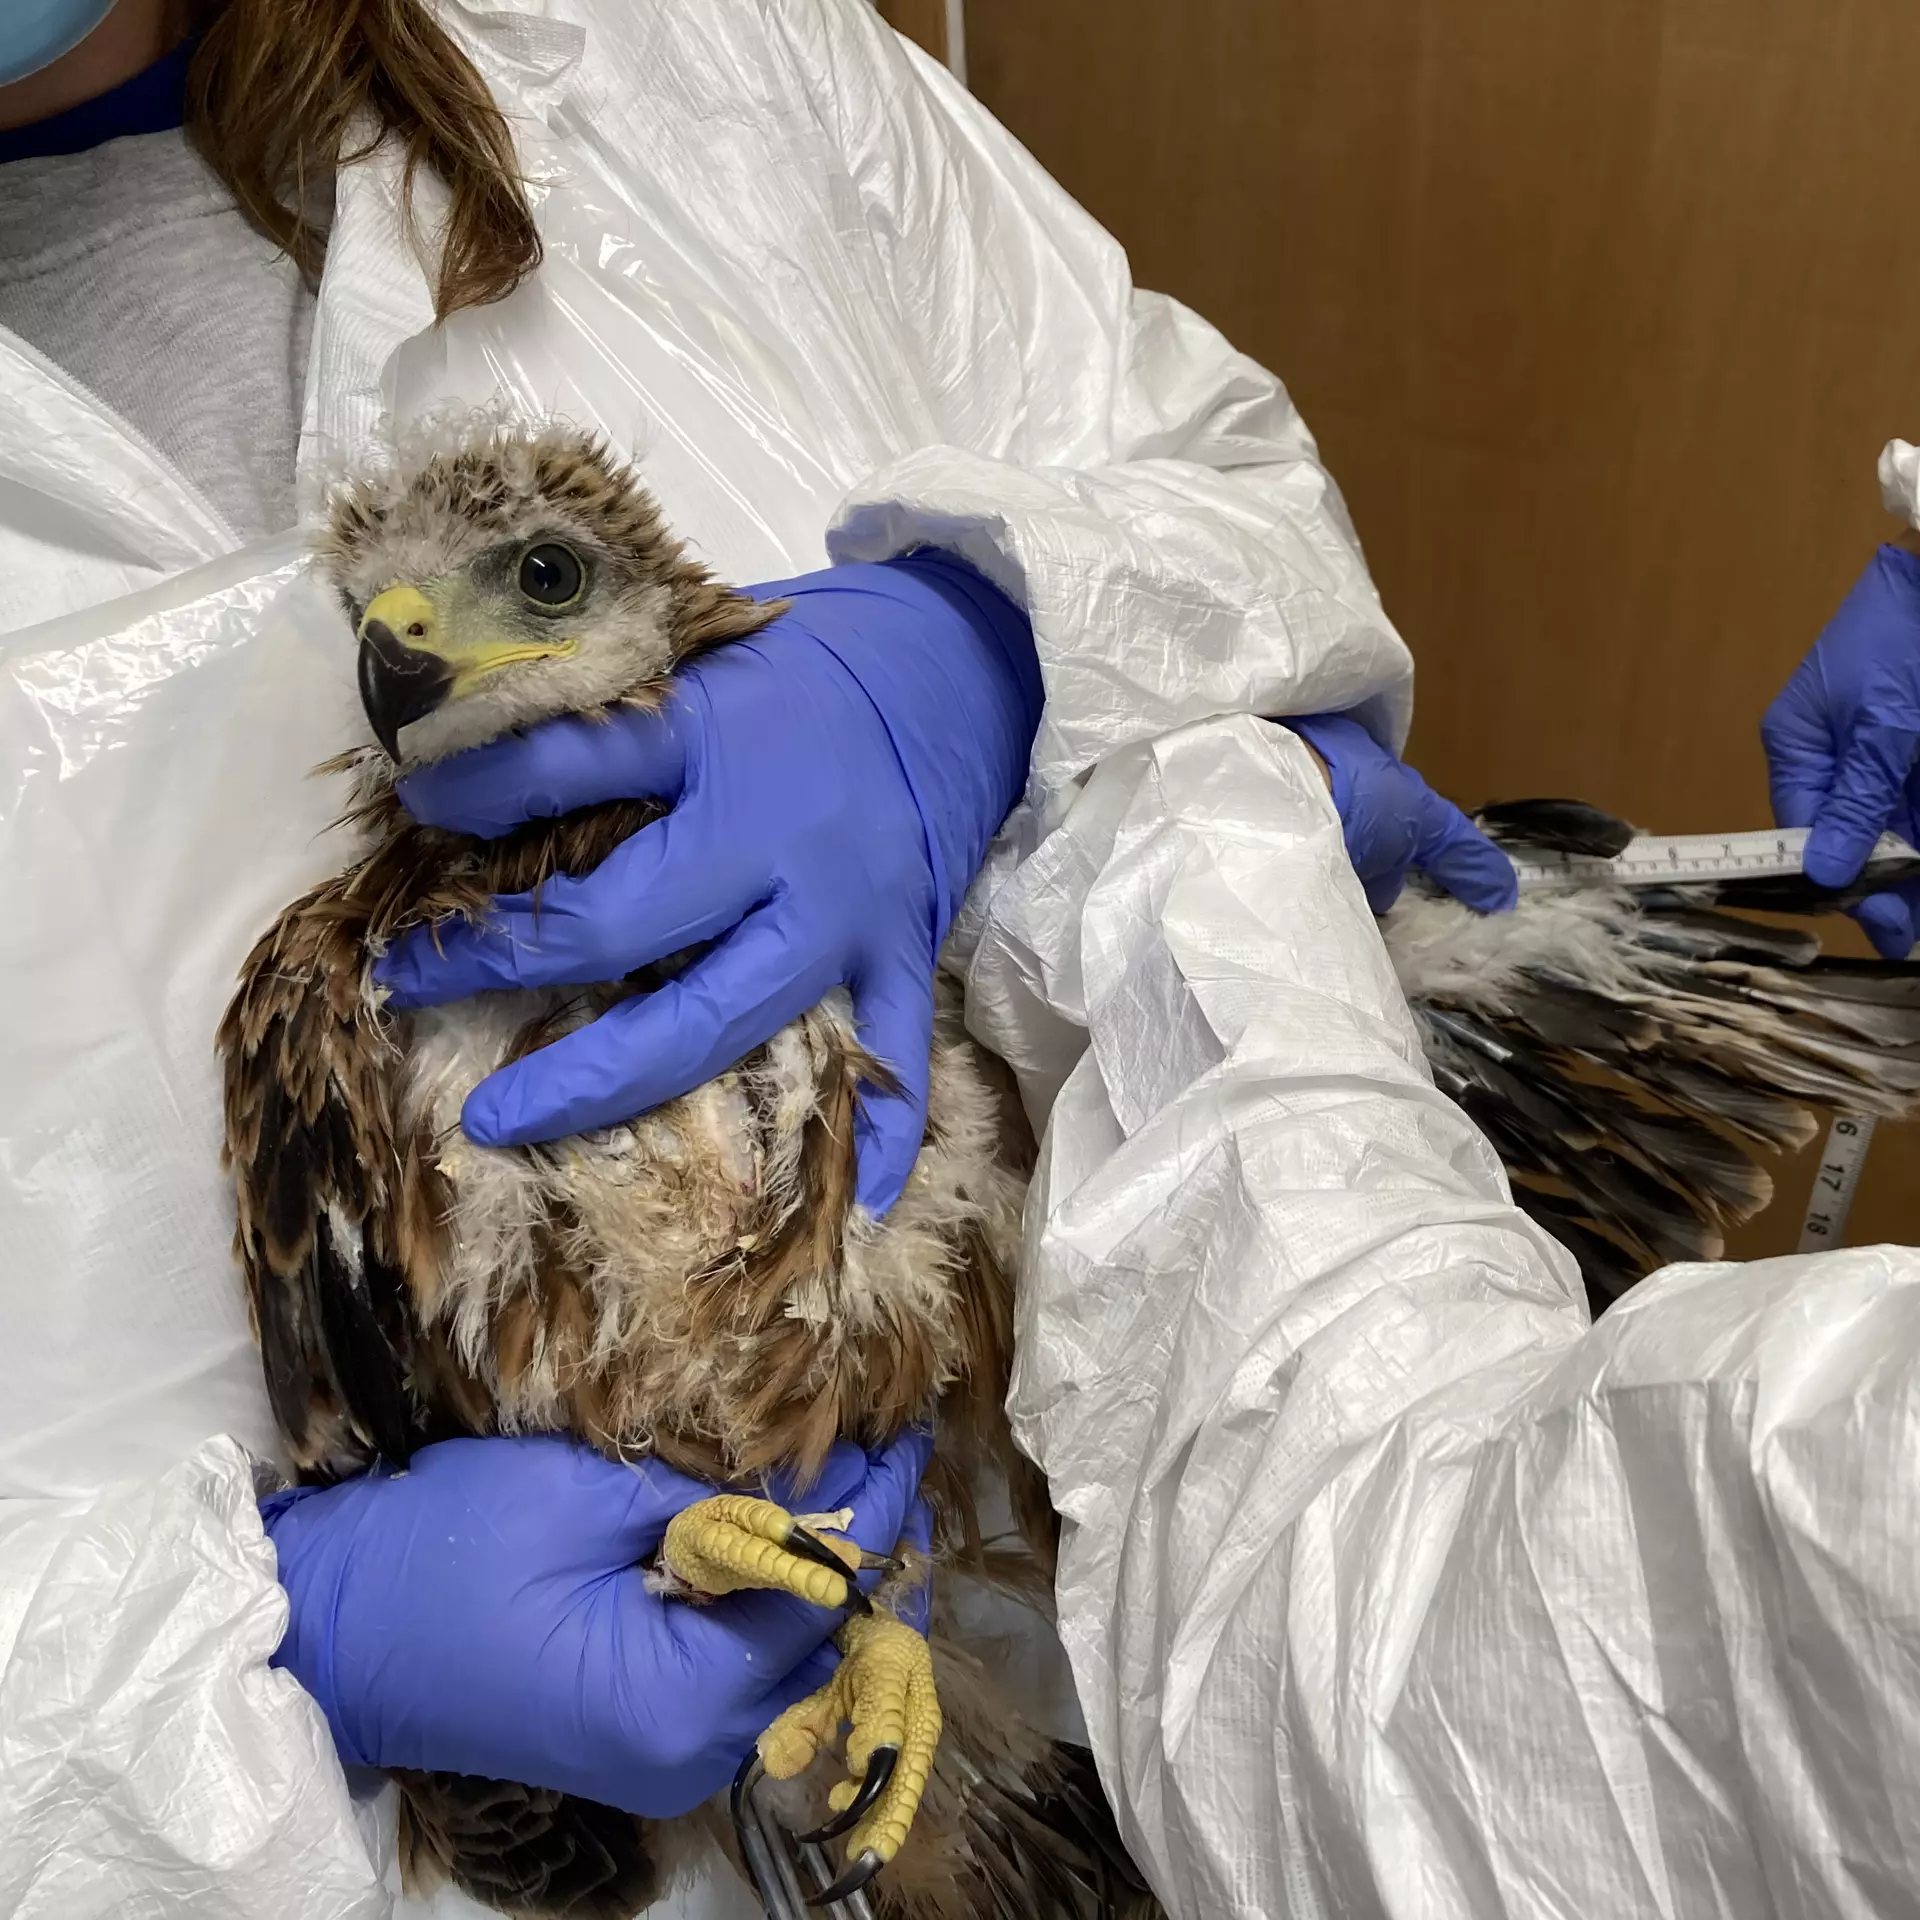 Red kite health check by ZSL scientists 